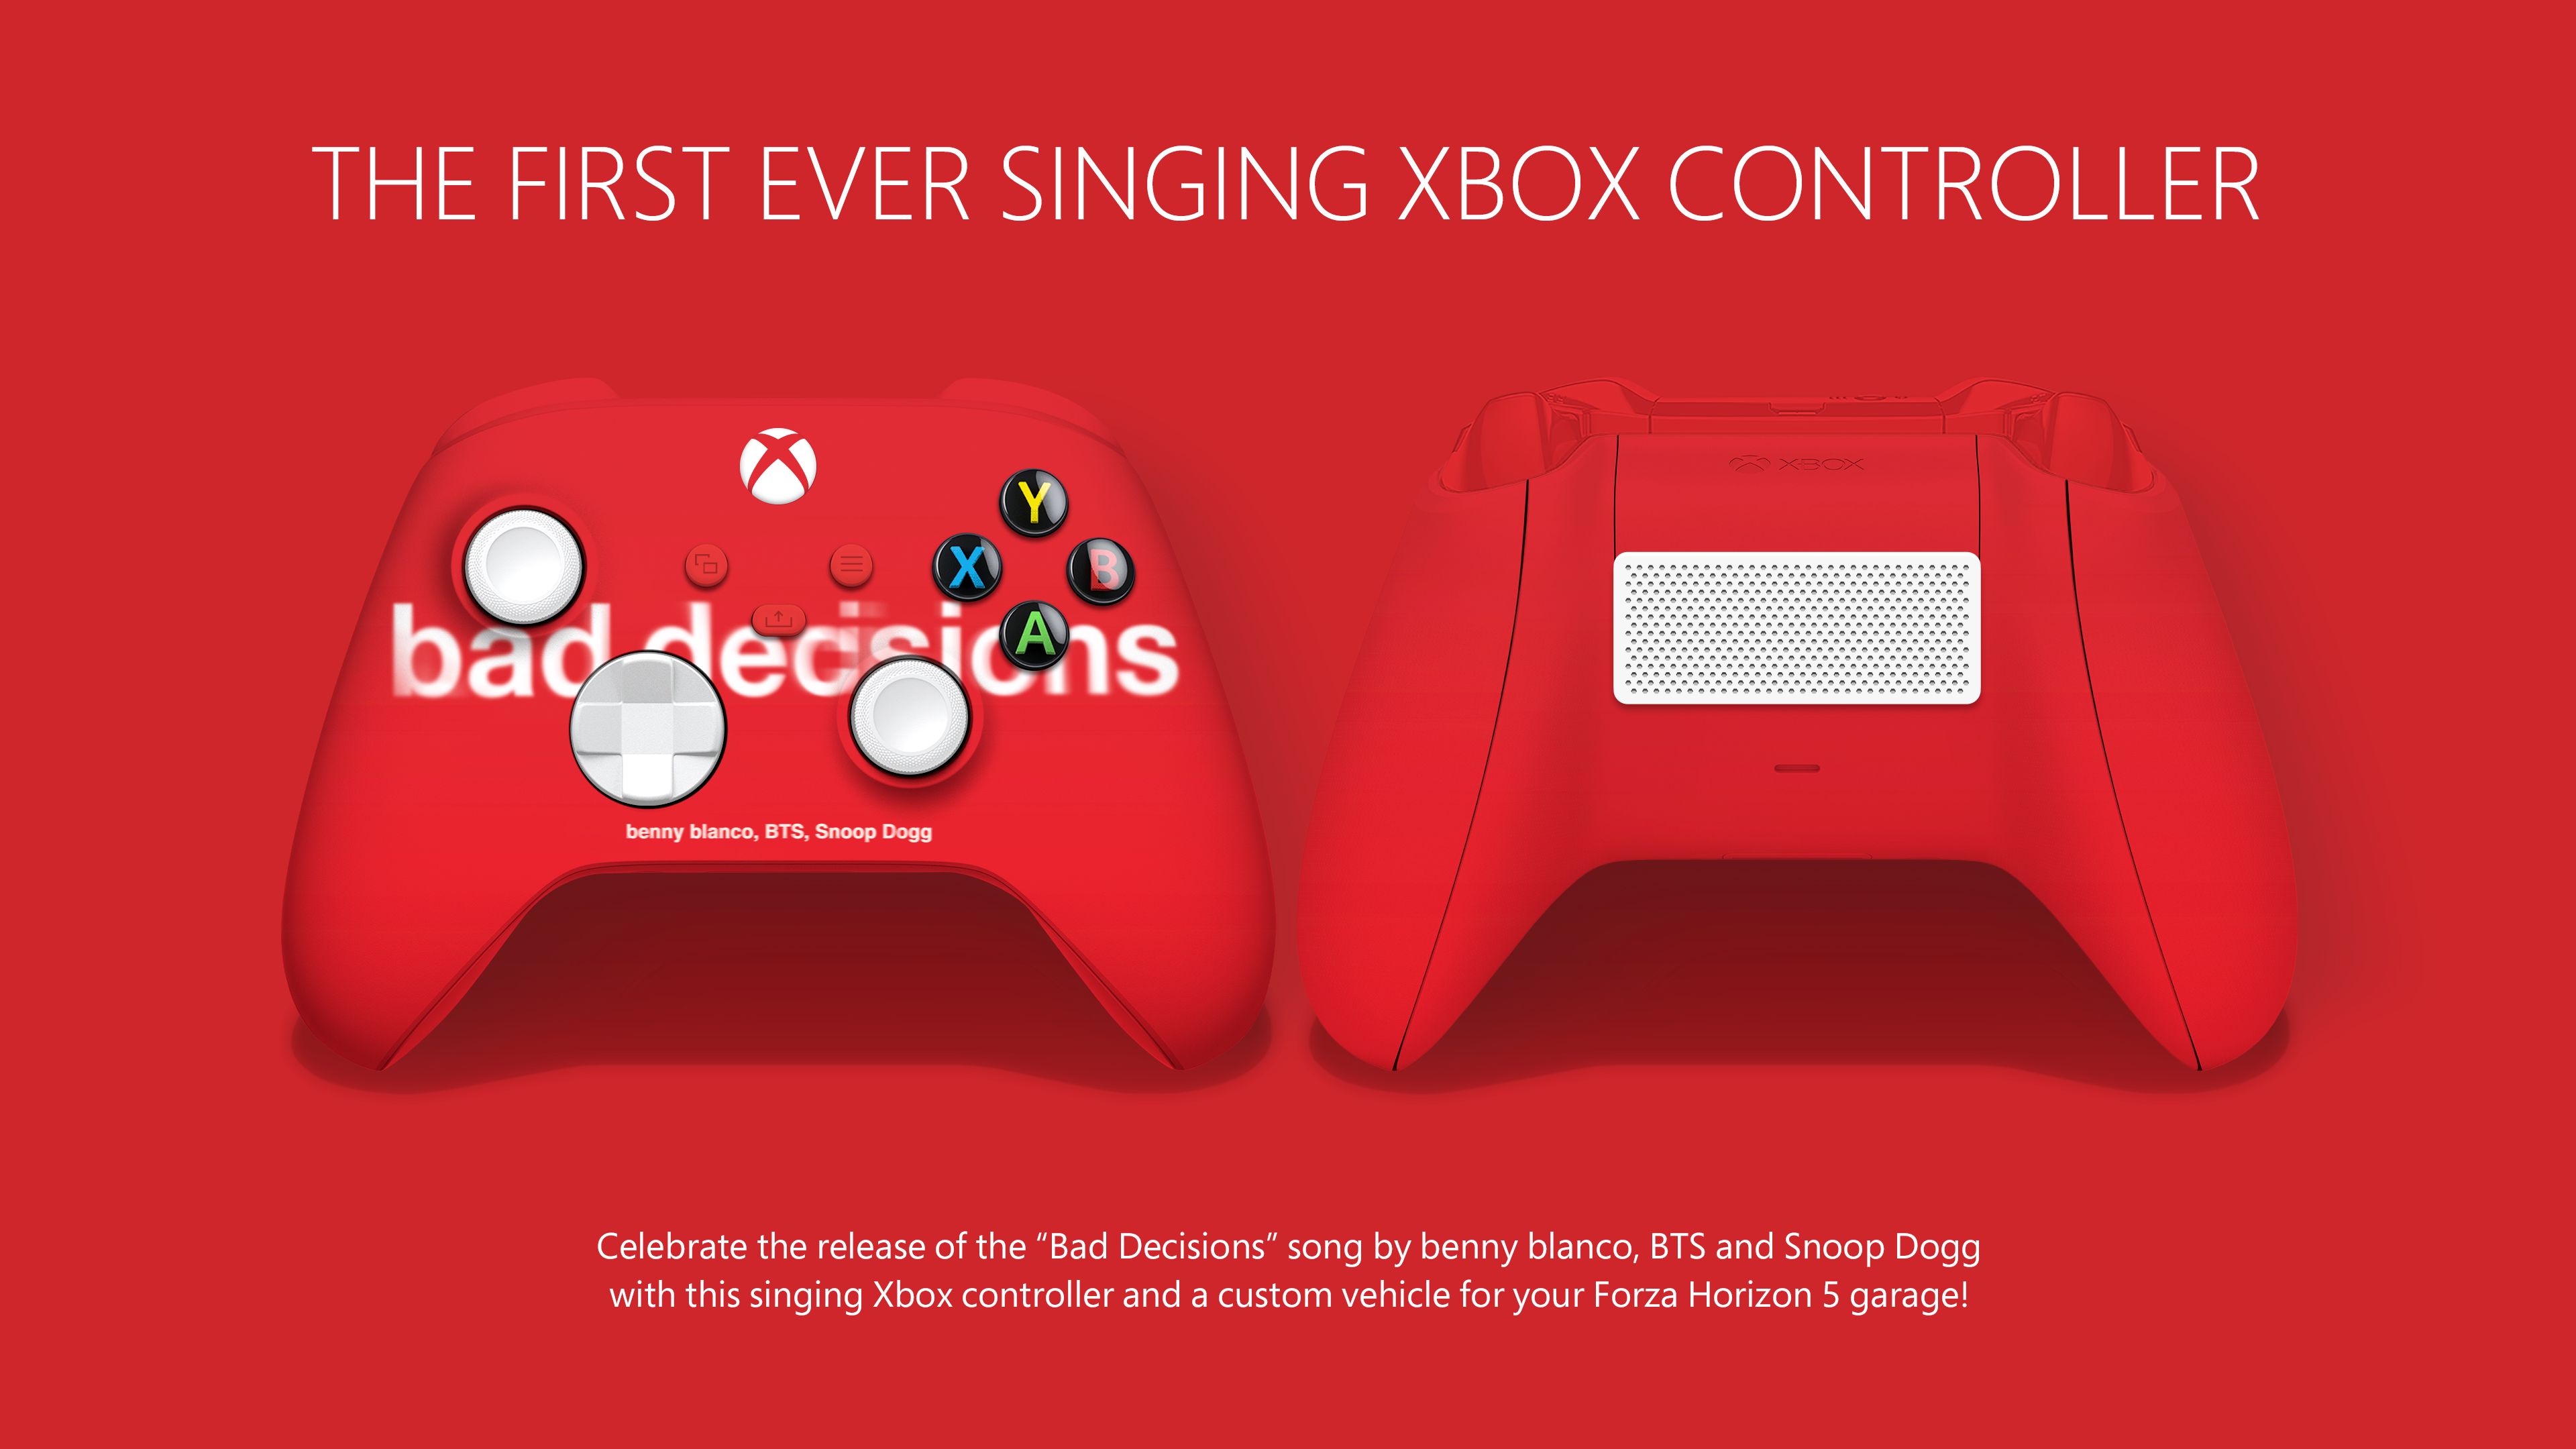 Here's How You Can Win Microsoft's Singing Xbox Controller